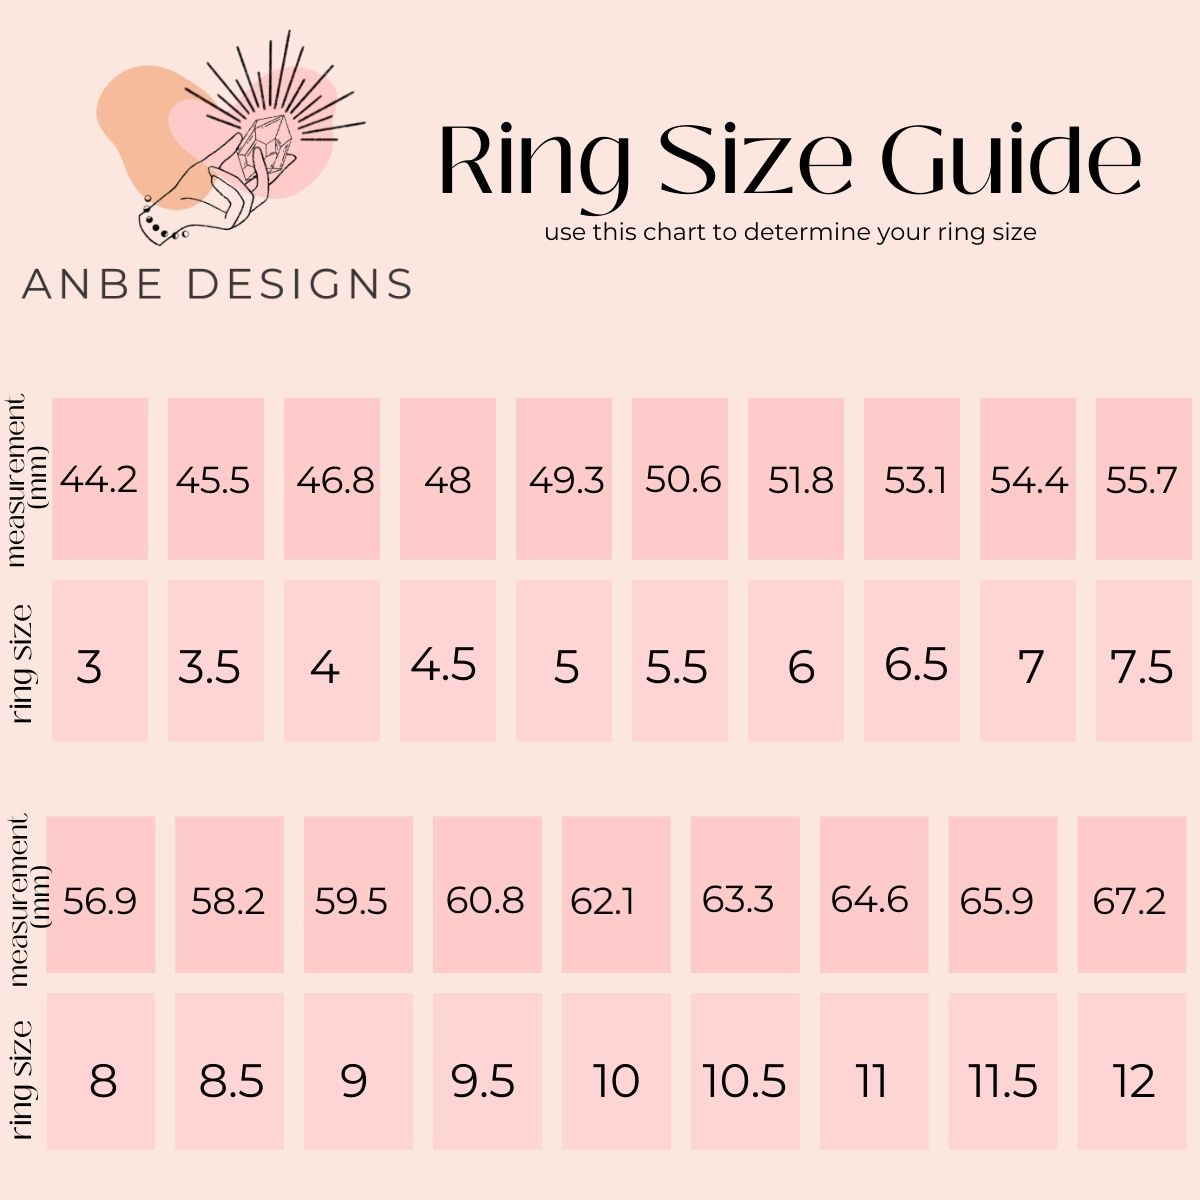 ANBE Designs Ring Size Guide, how to measure your ring size at home, ring size conversion chart